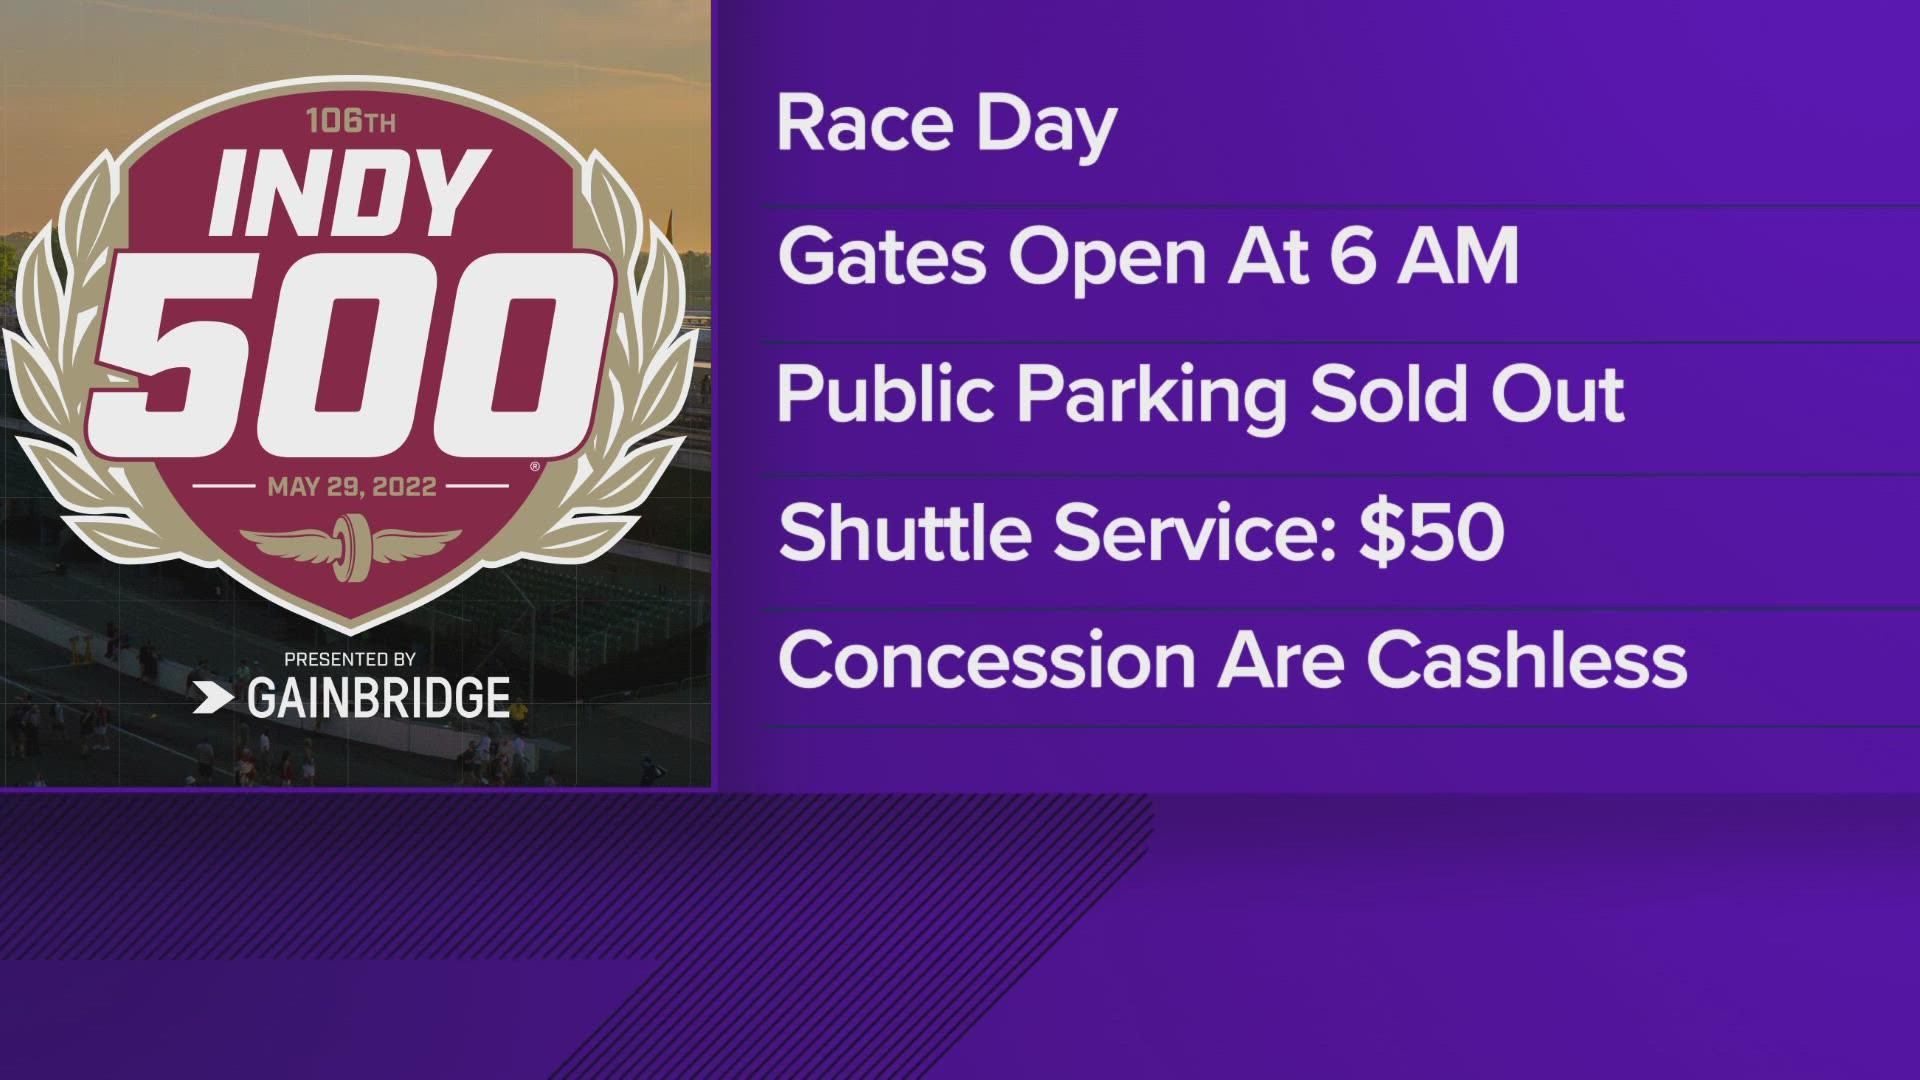 It's a busy weekend in Indy. So, here's what you need to know from the Legends Day concert tonight to race day at Indianapolis Motor Speedway on Sunday.